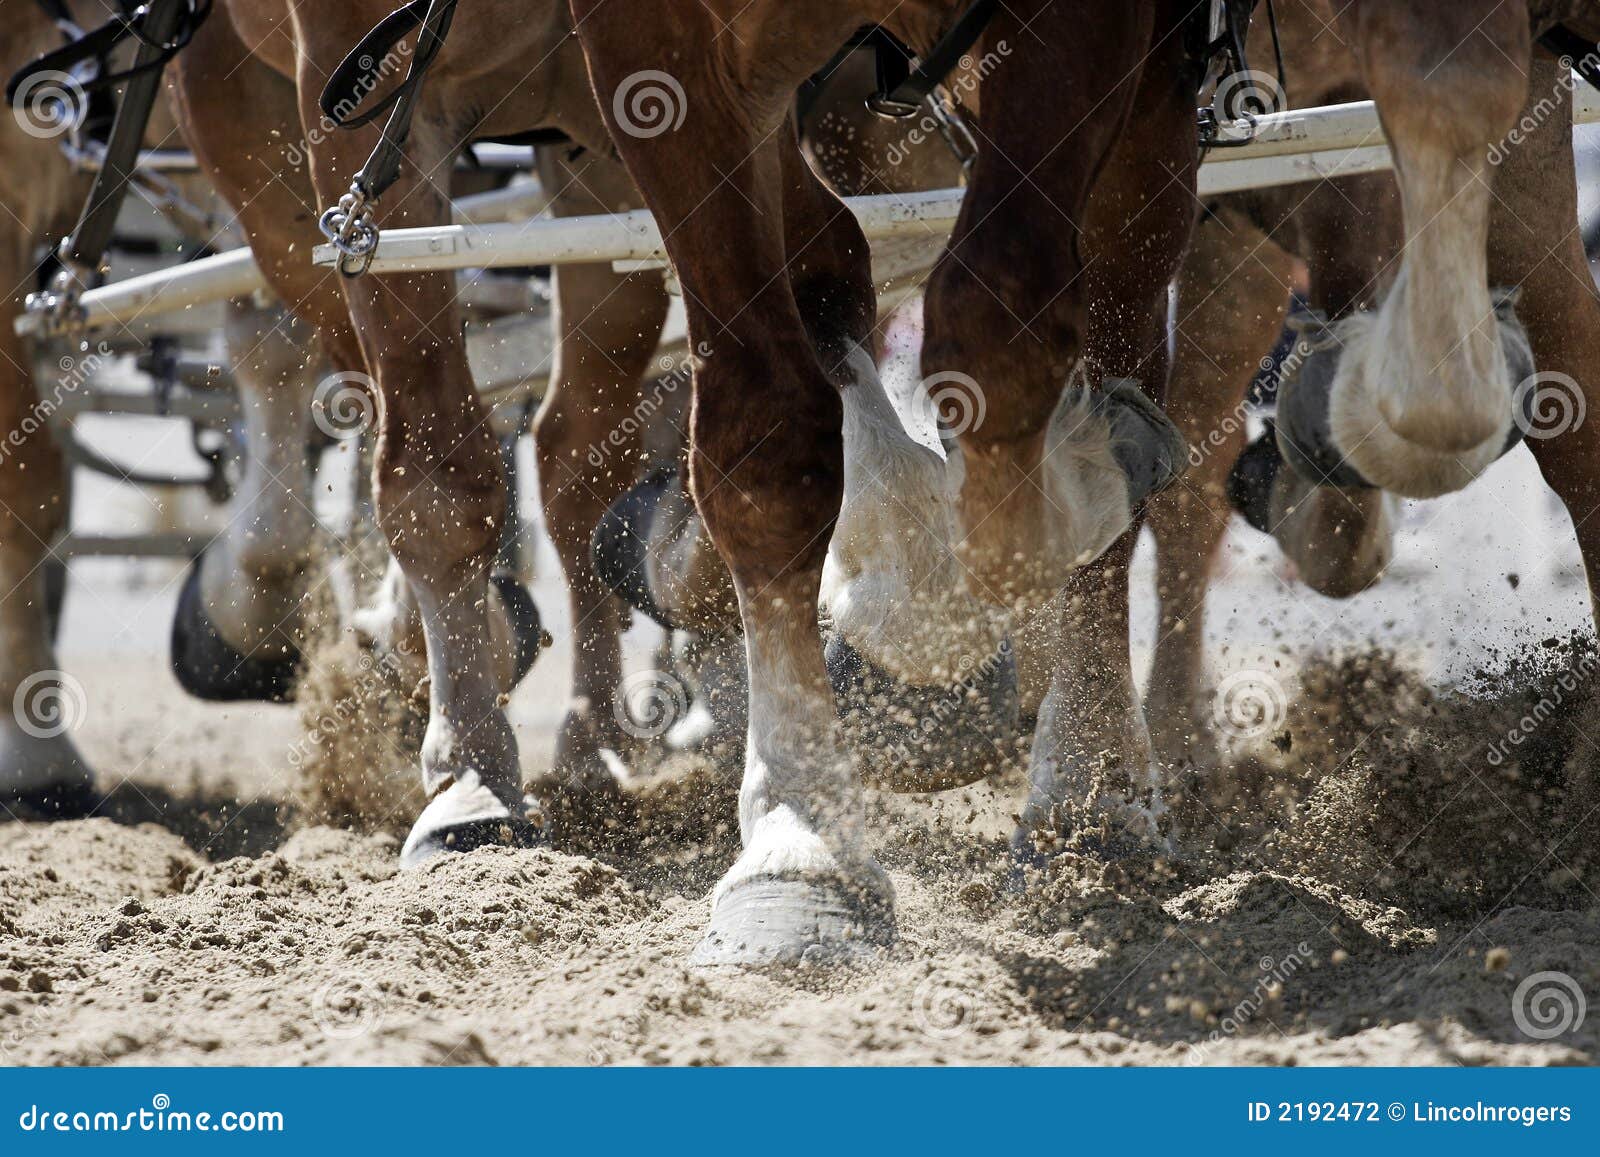 horse hooves in action